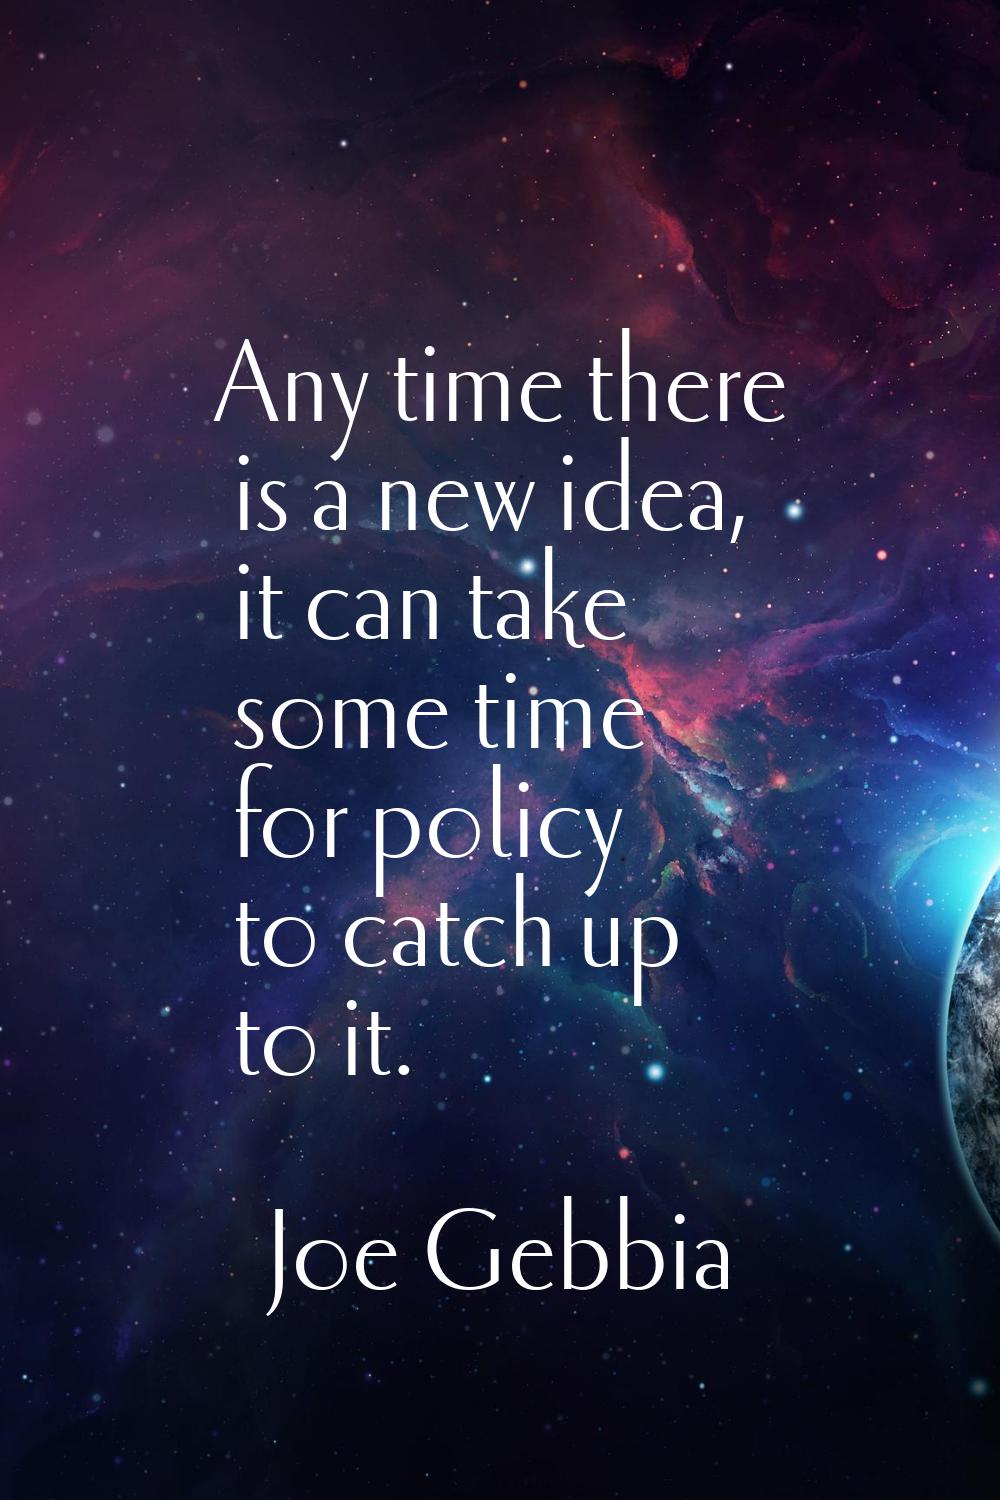 Any time there is a new idea, it can take some time for policy to catch up to it.